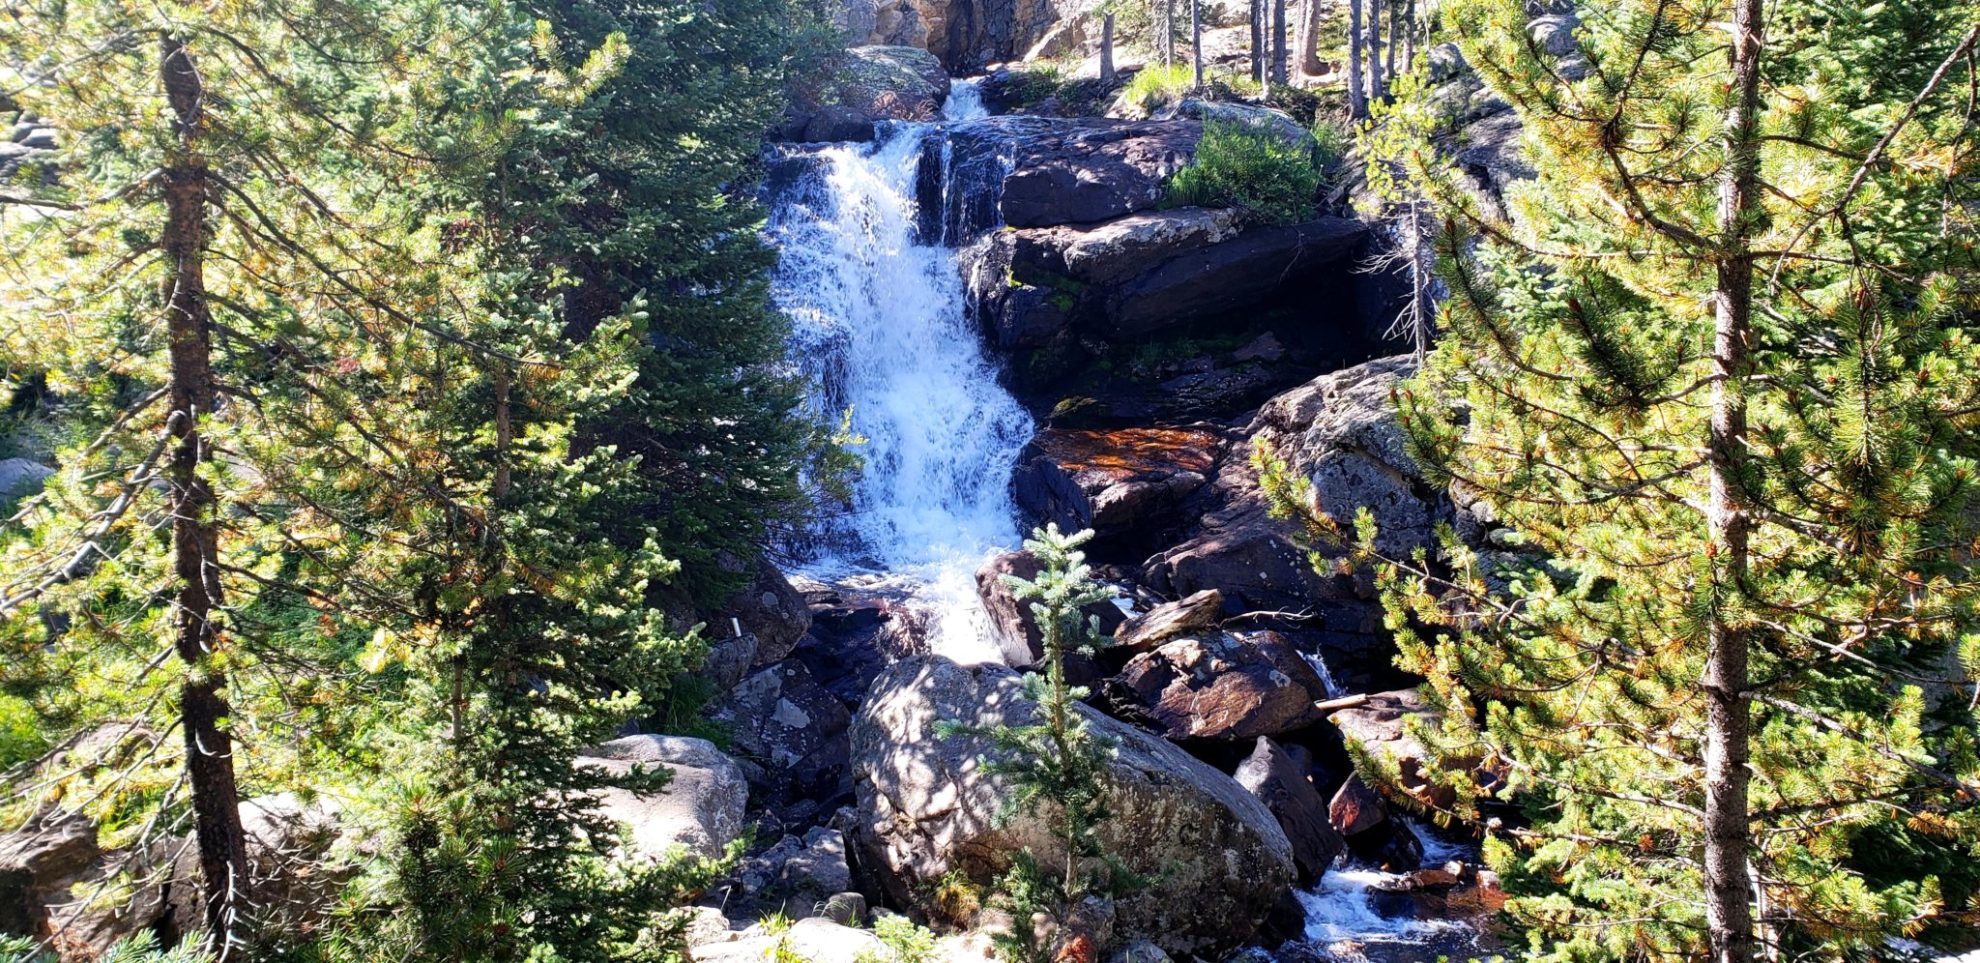 One of the many waterfalls along the trail